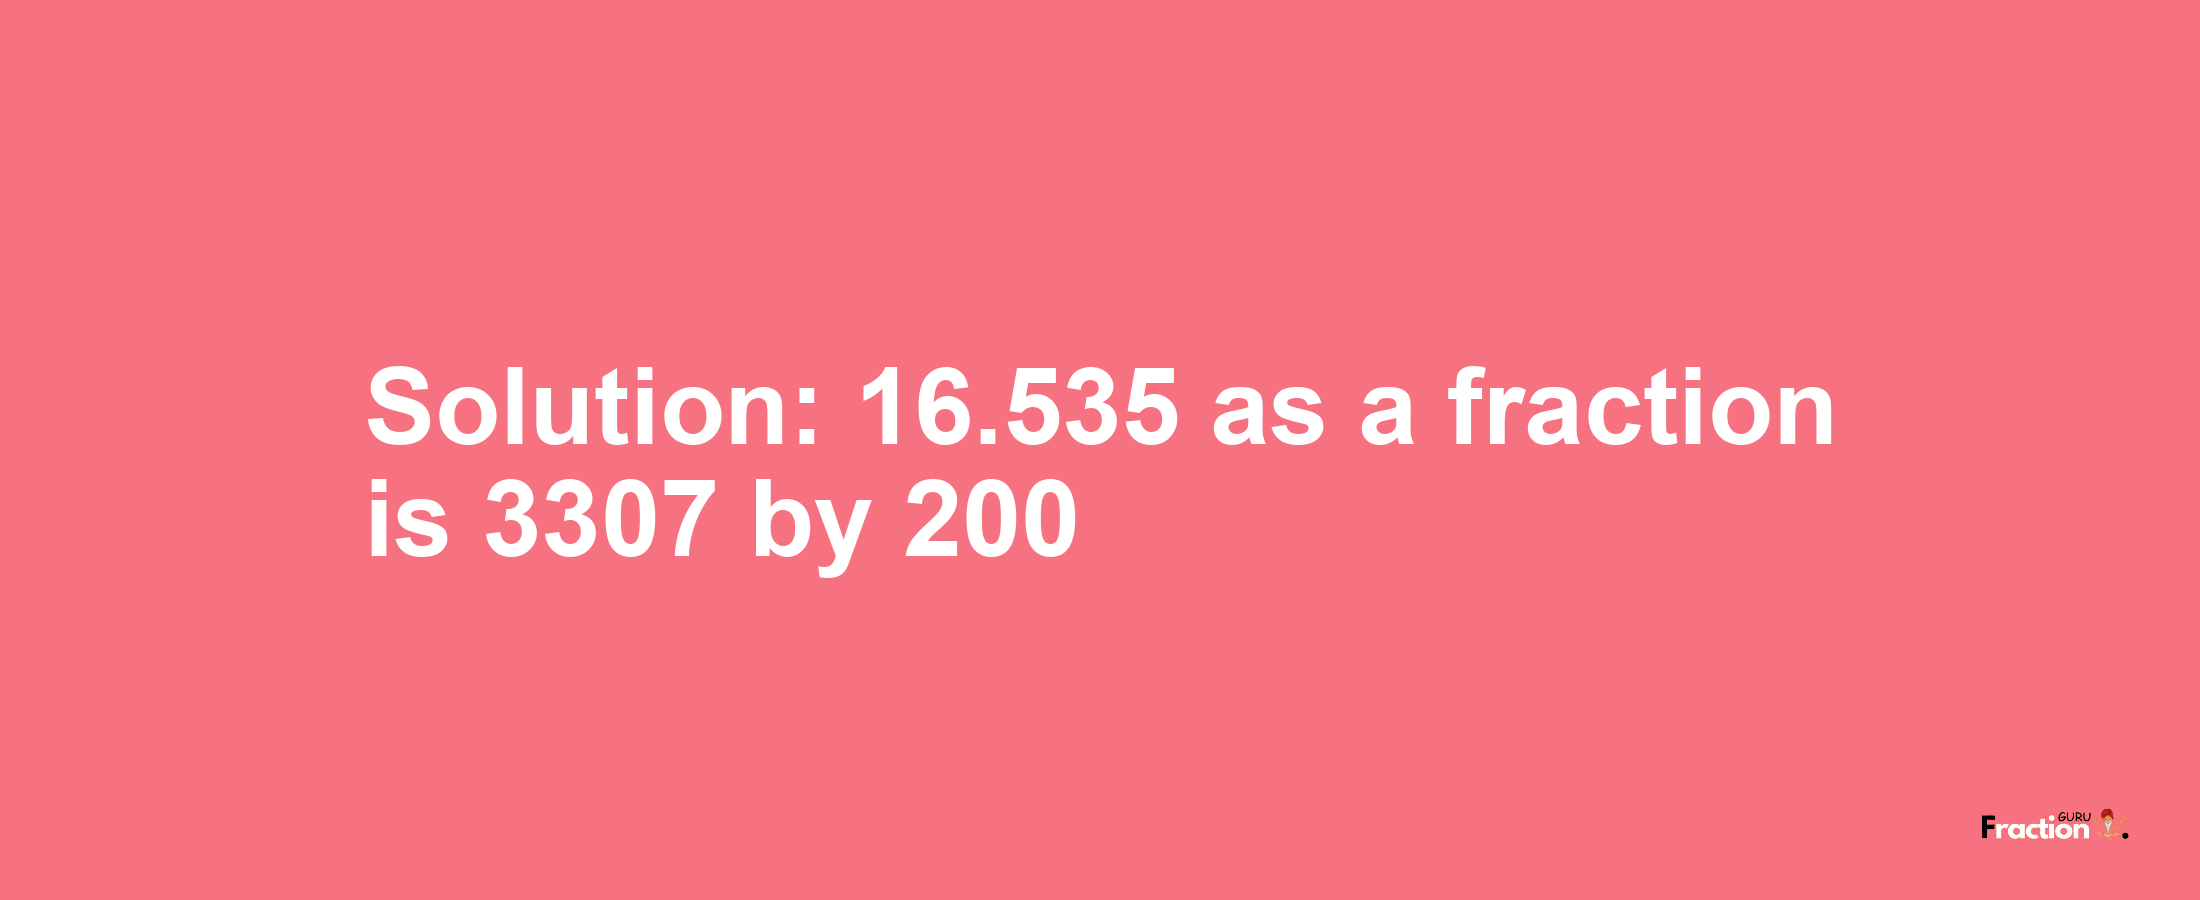 Solution:16.535 as a fraction is 3307/200